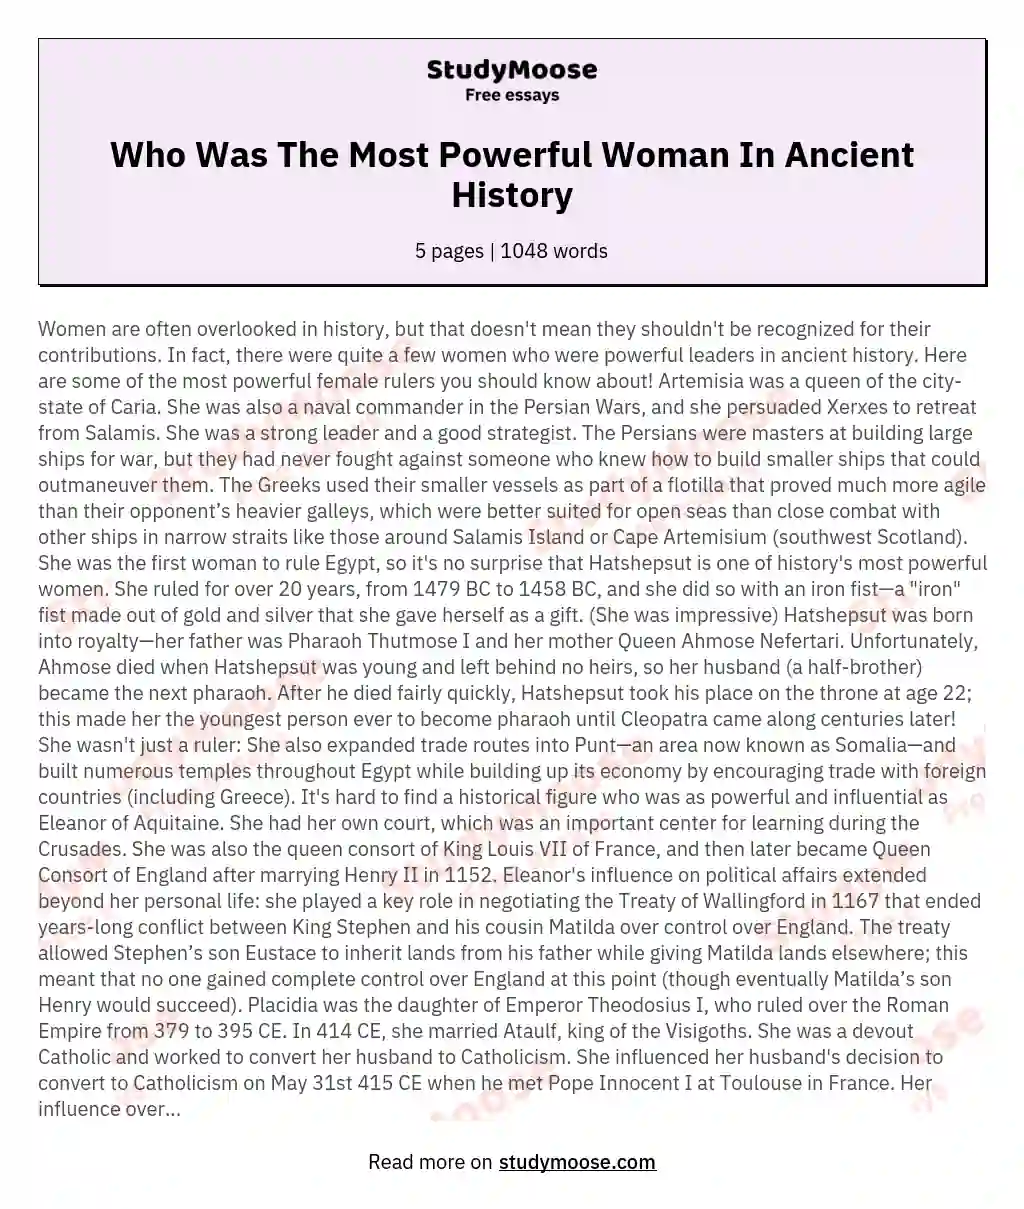 Who Was The Most Powerful Woman In Ancient History essay